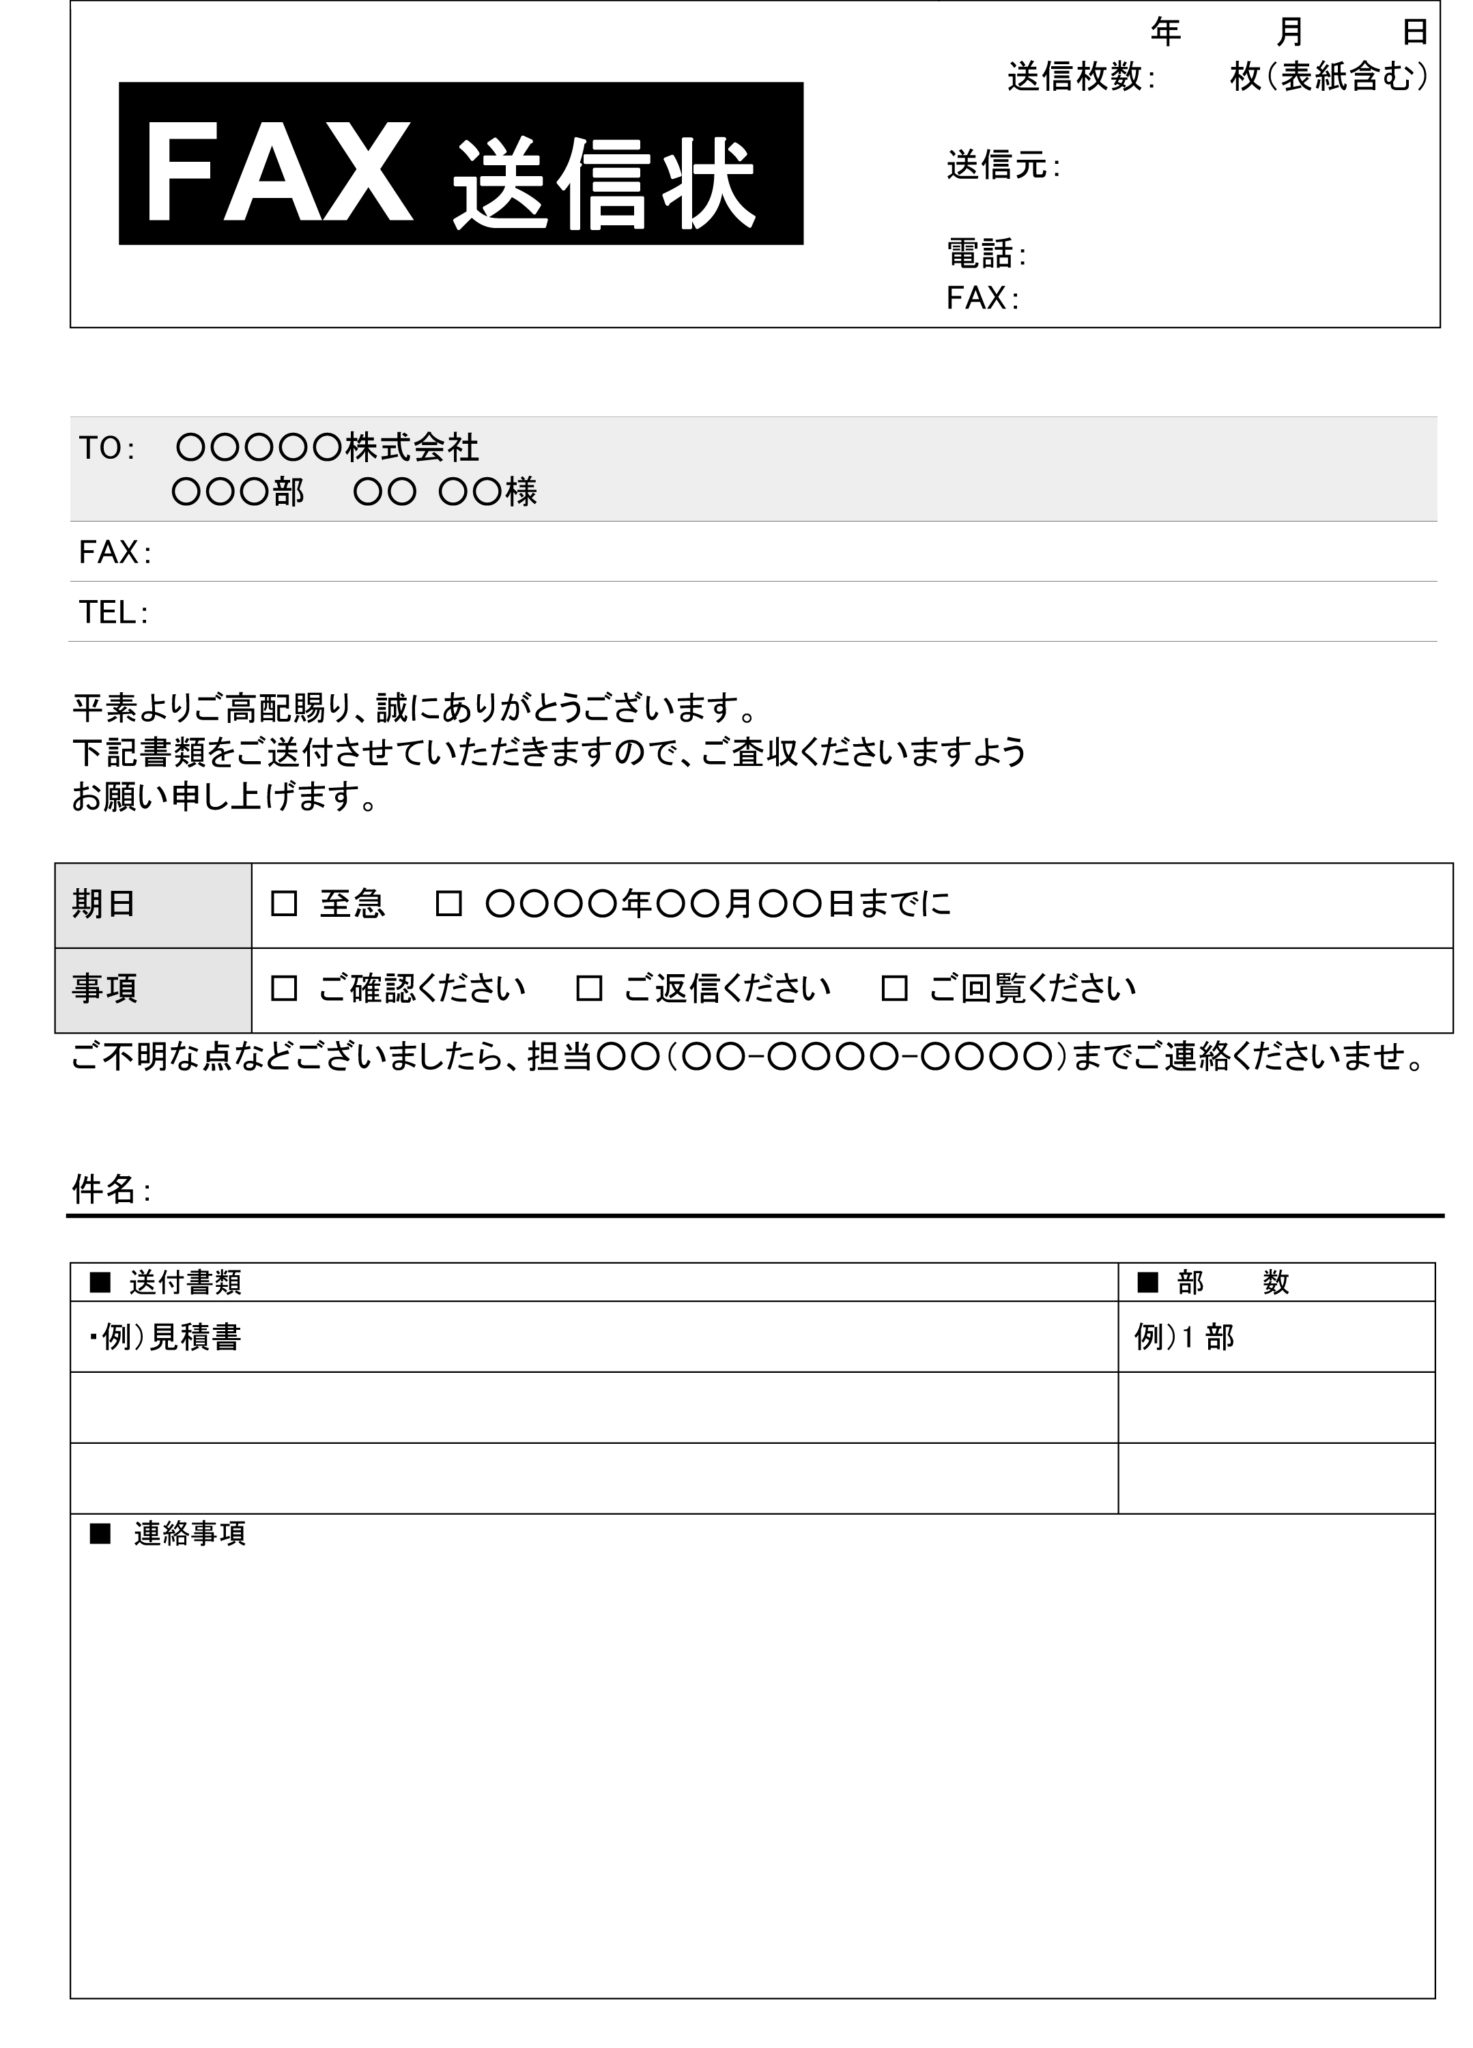 fax を メール で 受信